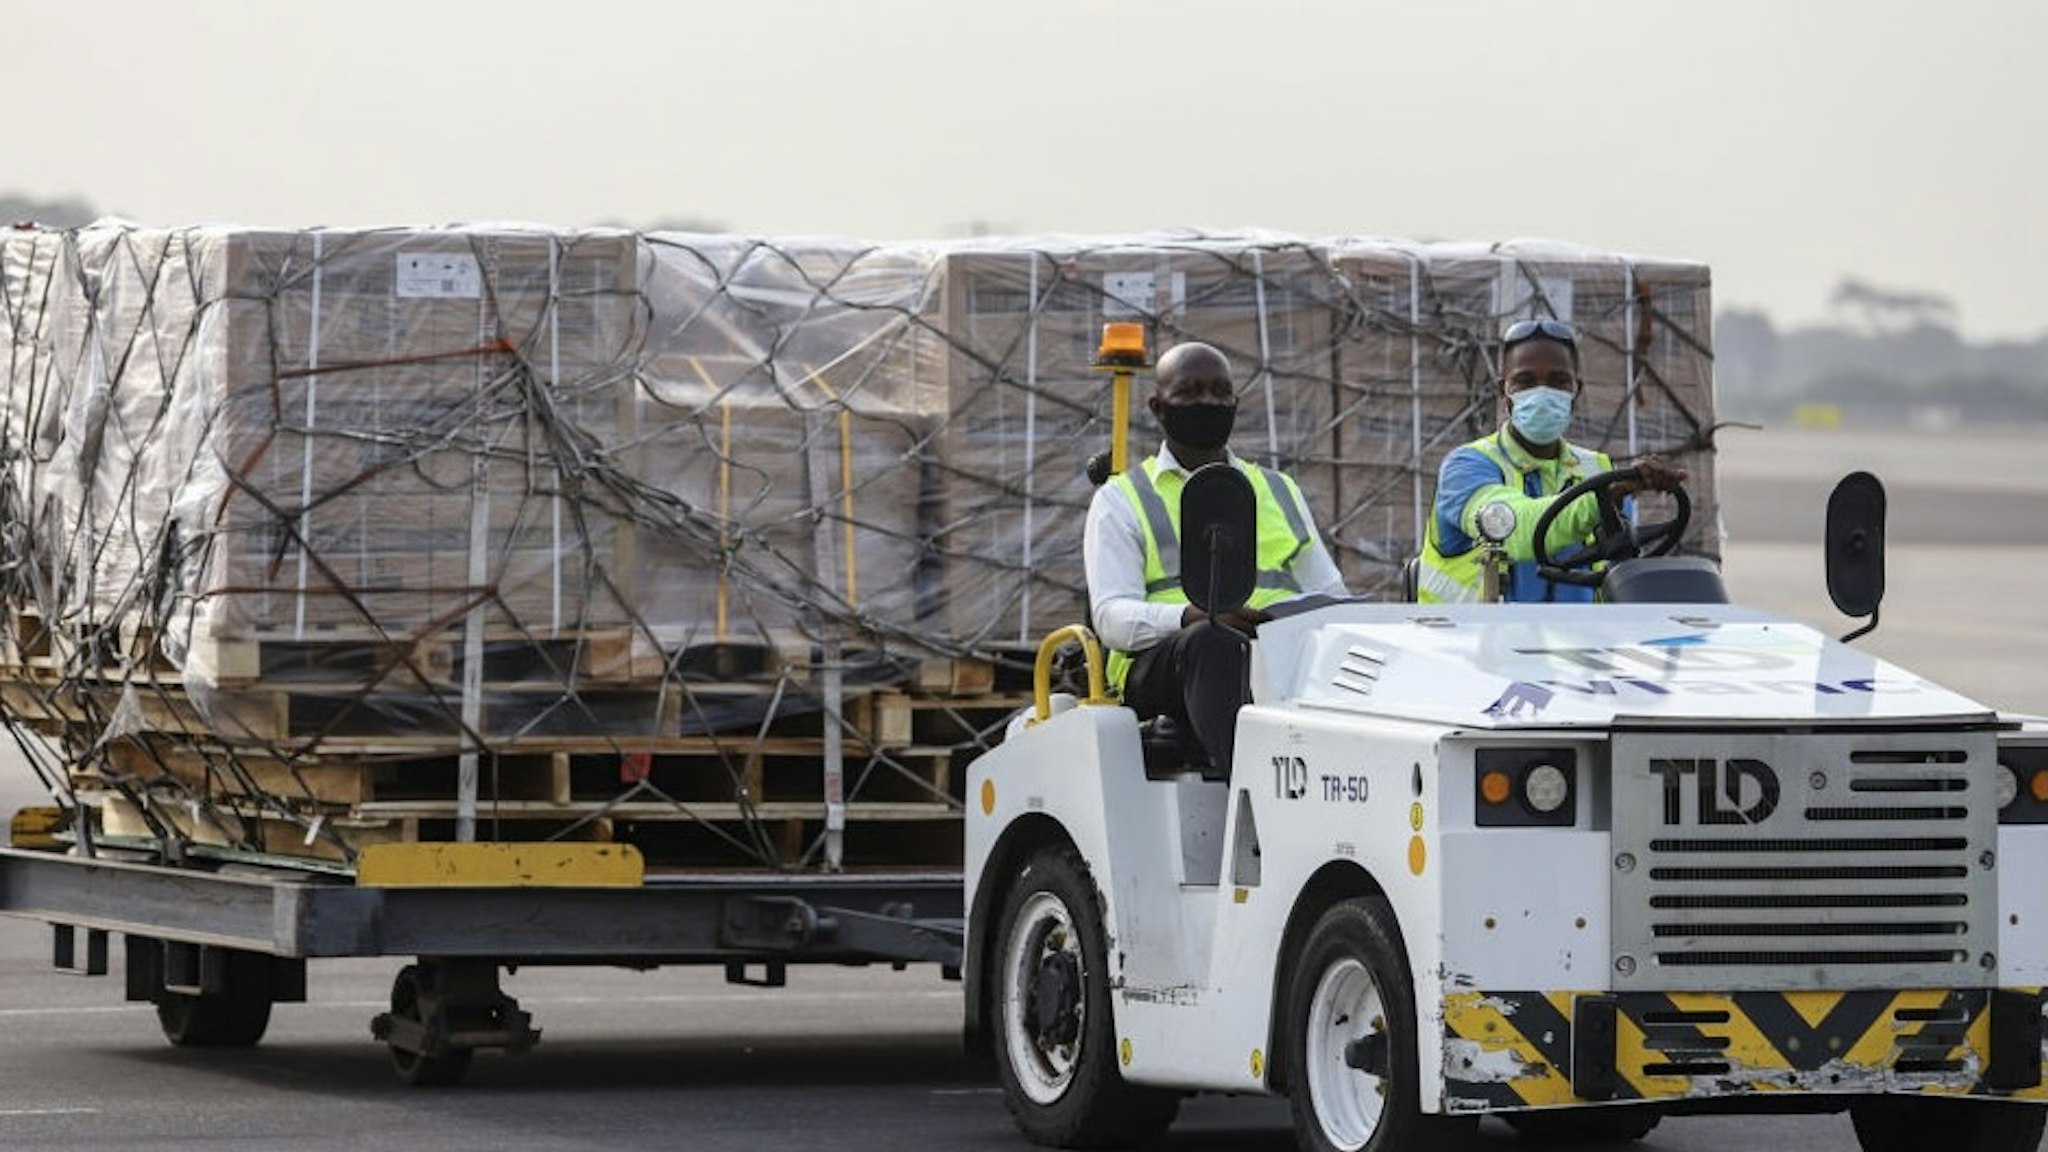 Airport workers transport on dollies a shipment of Covid-19 vaccines from the Covax global Covid-19 vaccination programme, at the Kotoka International Airport in Accra on February 24, 2021. - Ghana received the first shipment of Covid-19 vaccines from Covax, a global scheme to procure and distribute inoculations for free, as the world races to contain the pandemic. Covax, launched last April to help ensure a fairer distribution of coronavirus vaccines between rich and poor nations, said it would deliver two billion doses to its members by the end of the year. (Photo by Nipah Dennis / AFP) (Photo by NIPAH DENNIS/AFP via Getty Images)